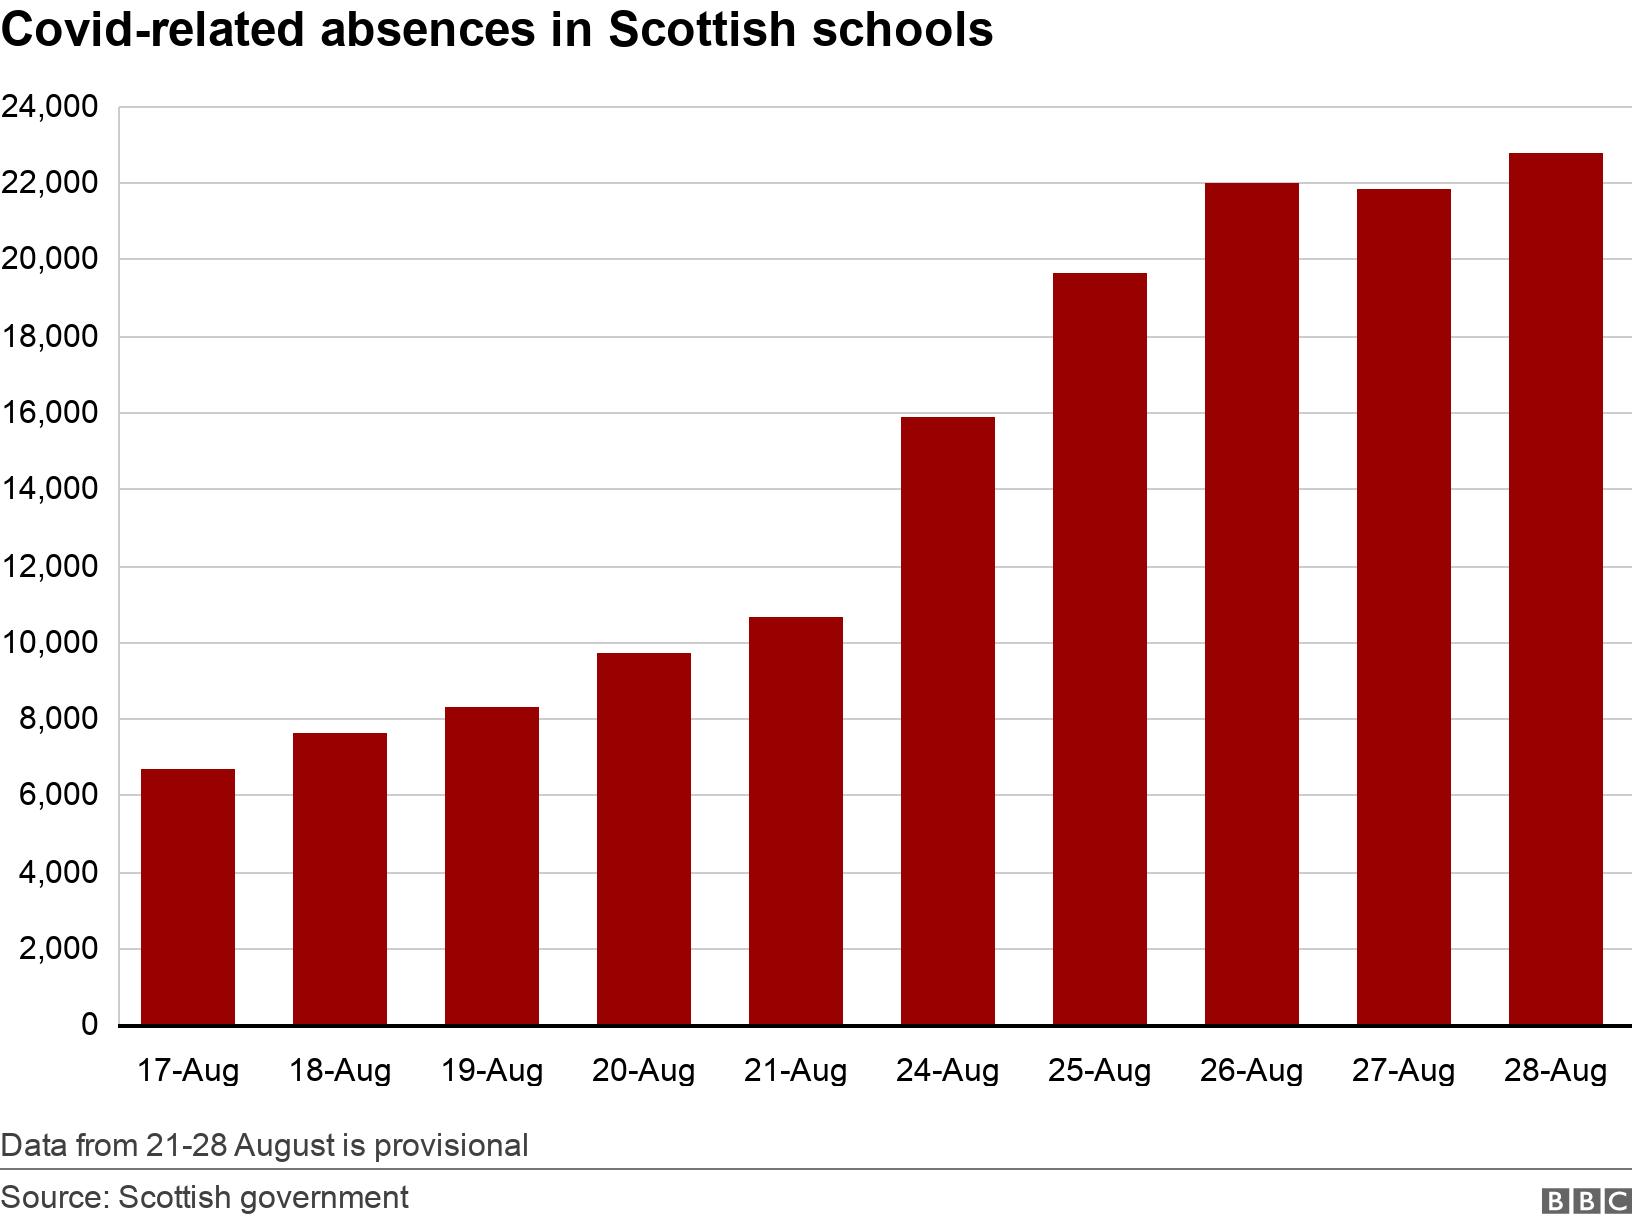 Covid-related absences in Scottish schools. . Data from 21-28 August is provisional.